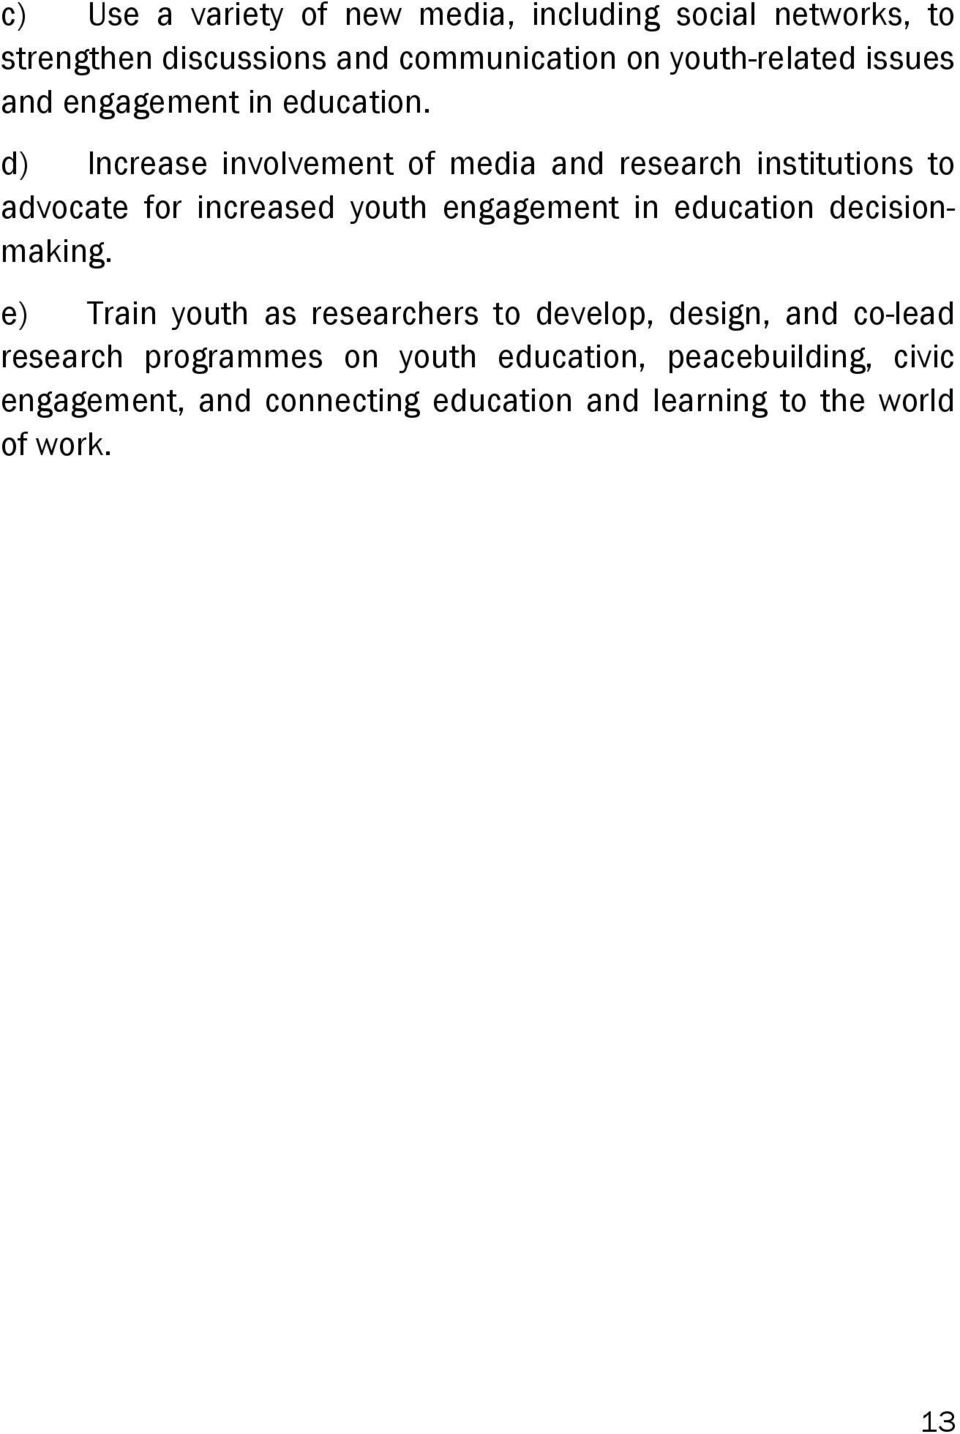 d) Increase involvement of media and research institutions to advocate for increased youth engagement in education